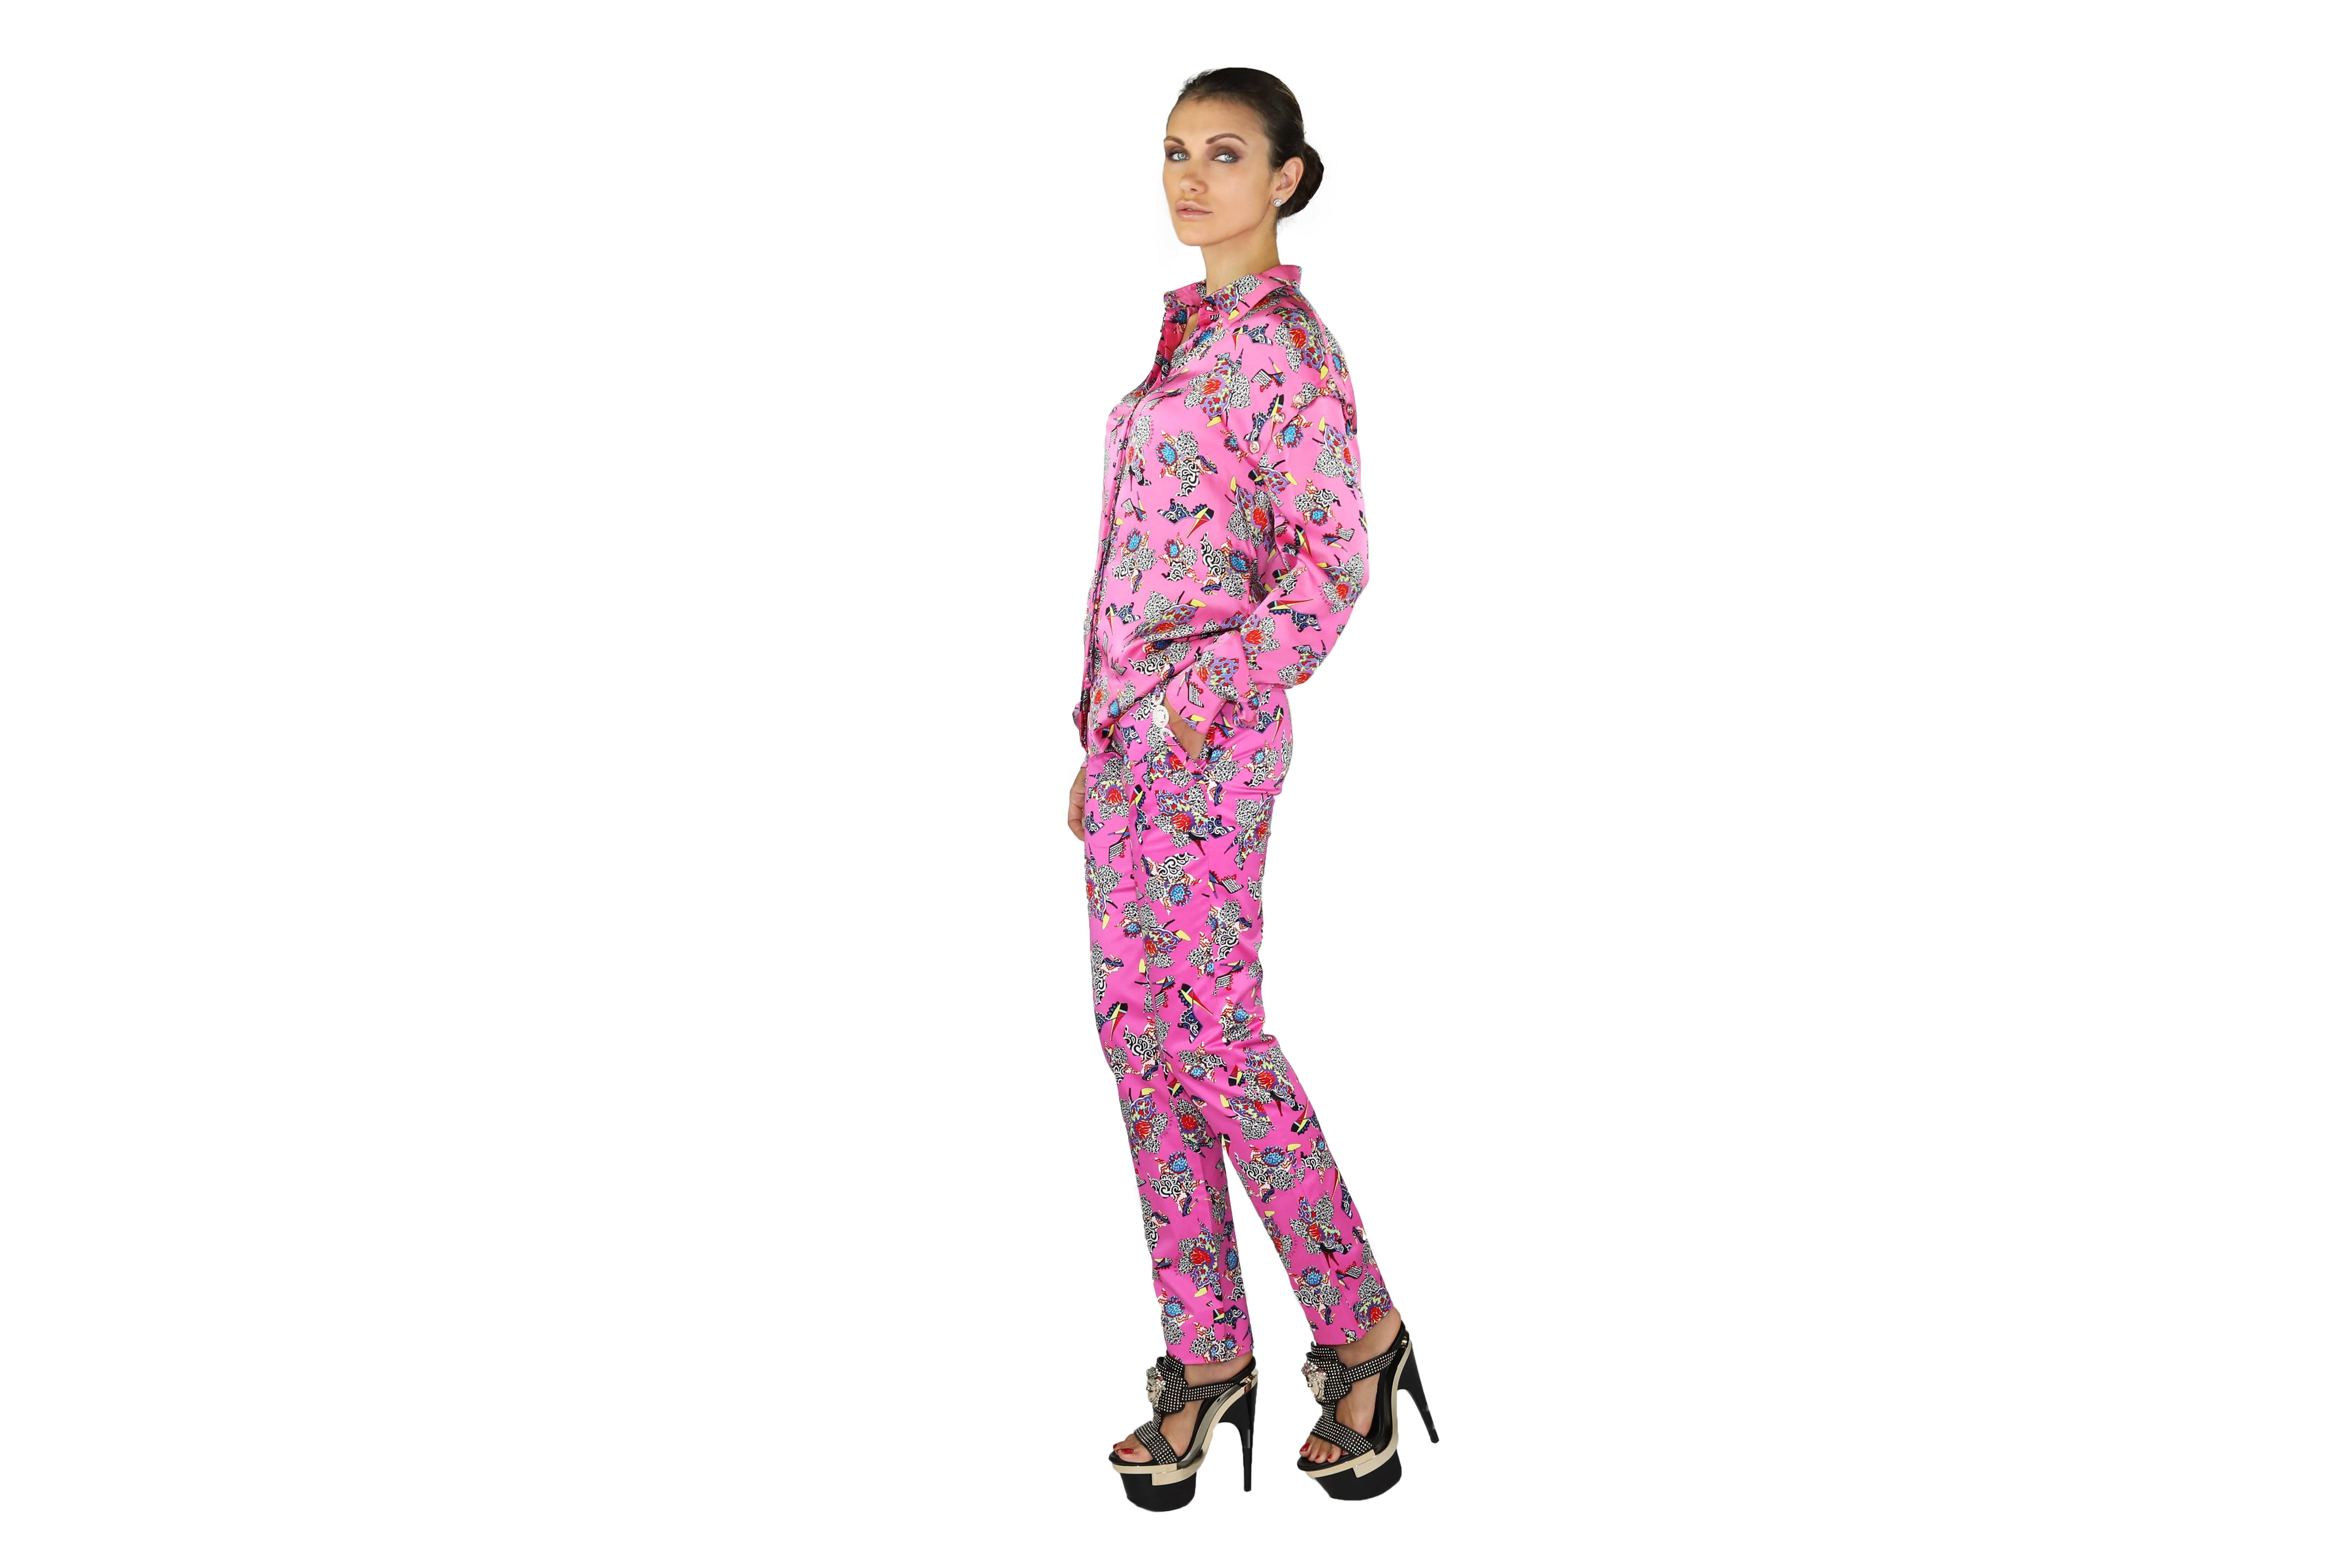 Women's Resort 2013 Look # 8 NEW VERSACE ICONIC PRINT SILK and COTTON PANT SUIT 38 - 2 For Sale